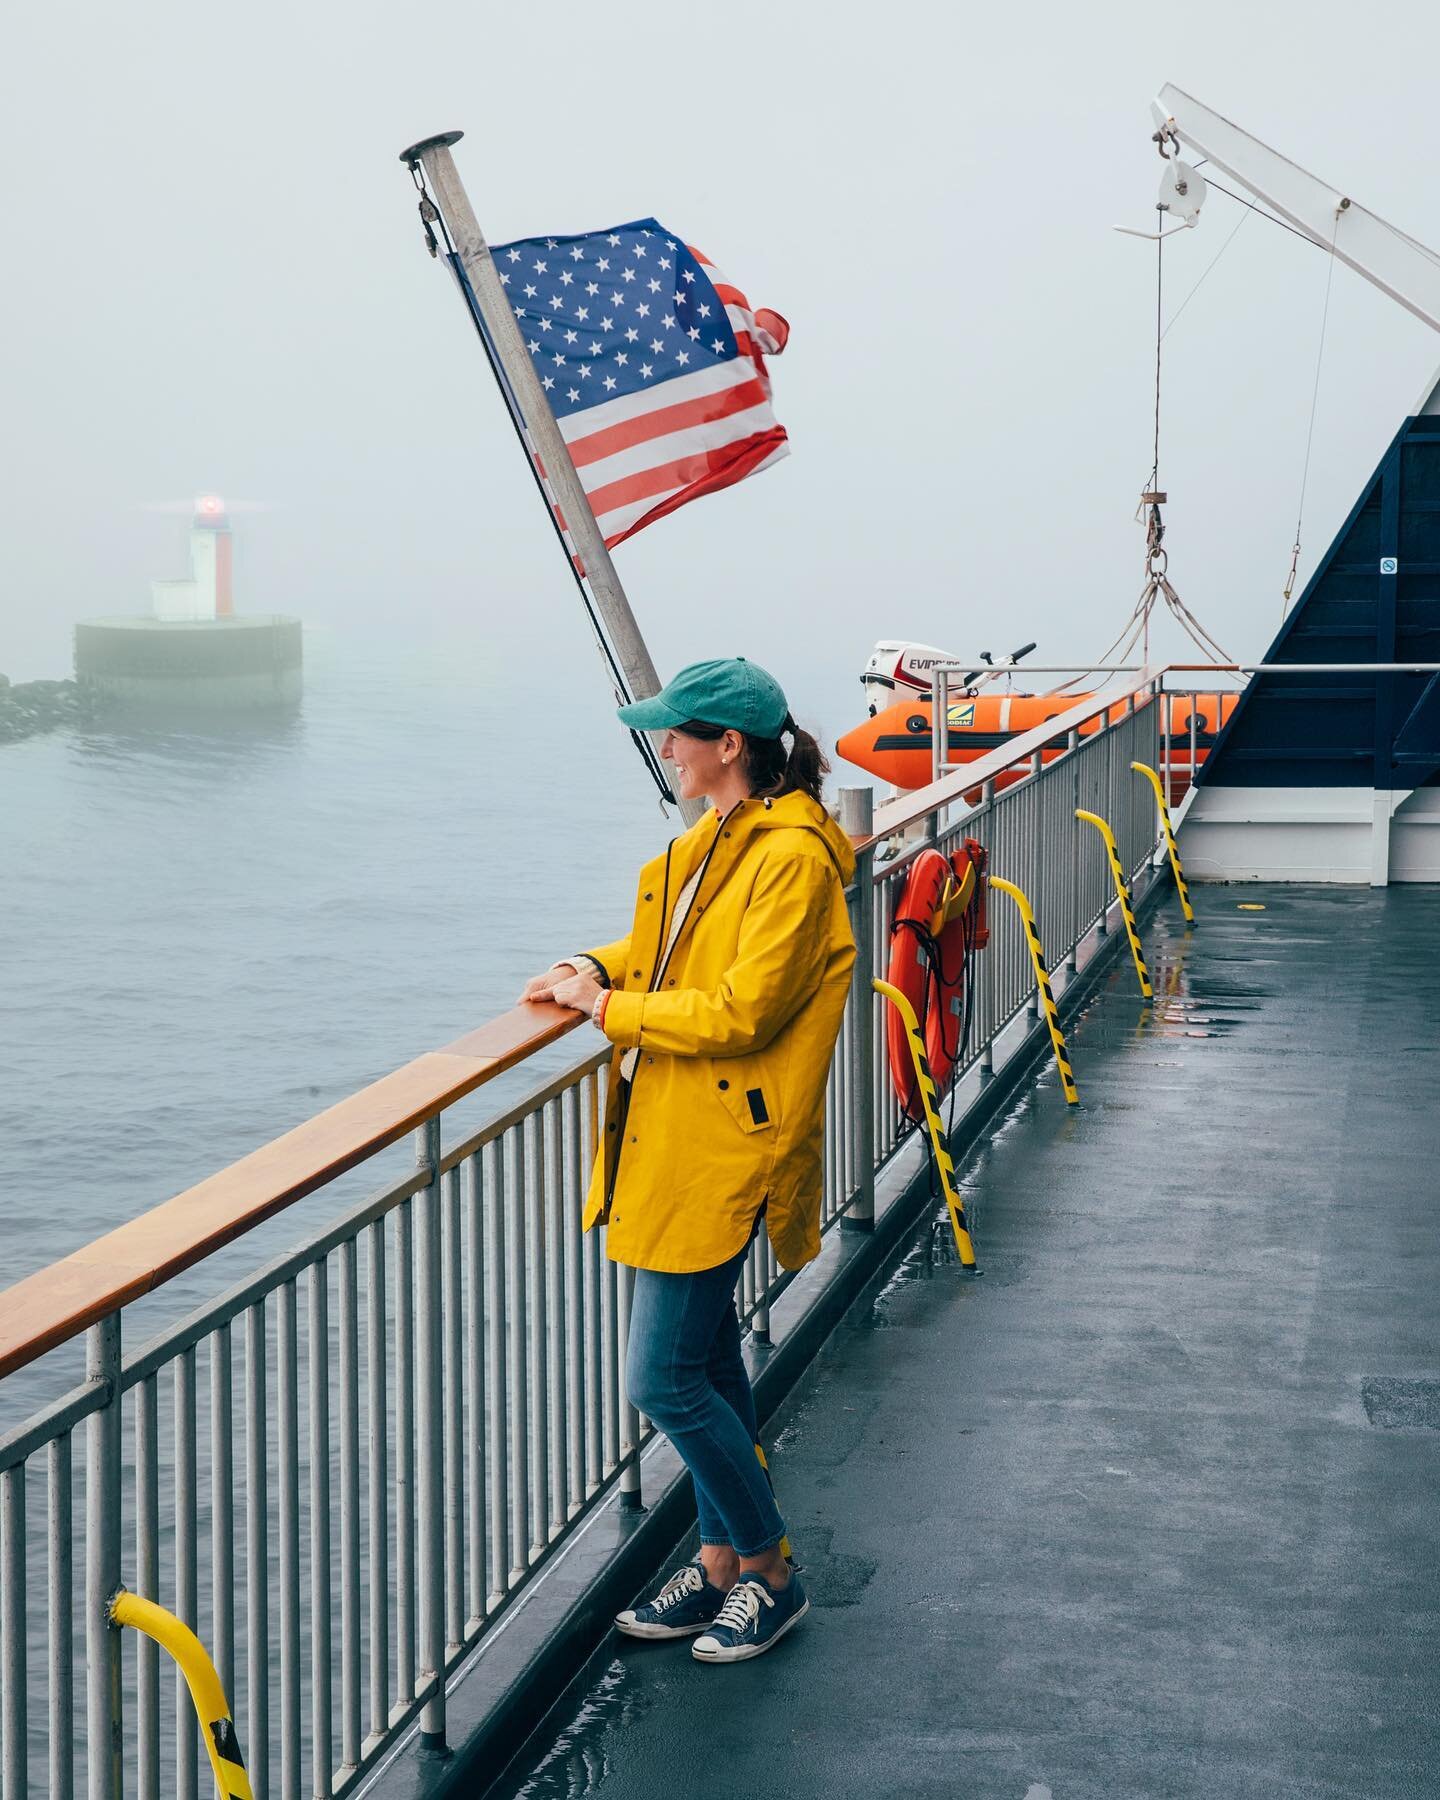 Land ho! 🇨🇦 Last weekend we took @thecatferry from Bar Harbor, Maine to Yarmouth, Nova Scotia and had the best time whale watching, antiquing, touring lighthouses and eating seafood. The CAT is a high-speed Catamaran car ferry that crosses the Gulf